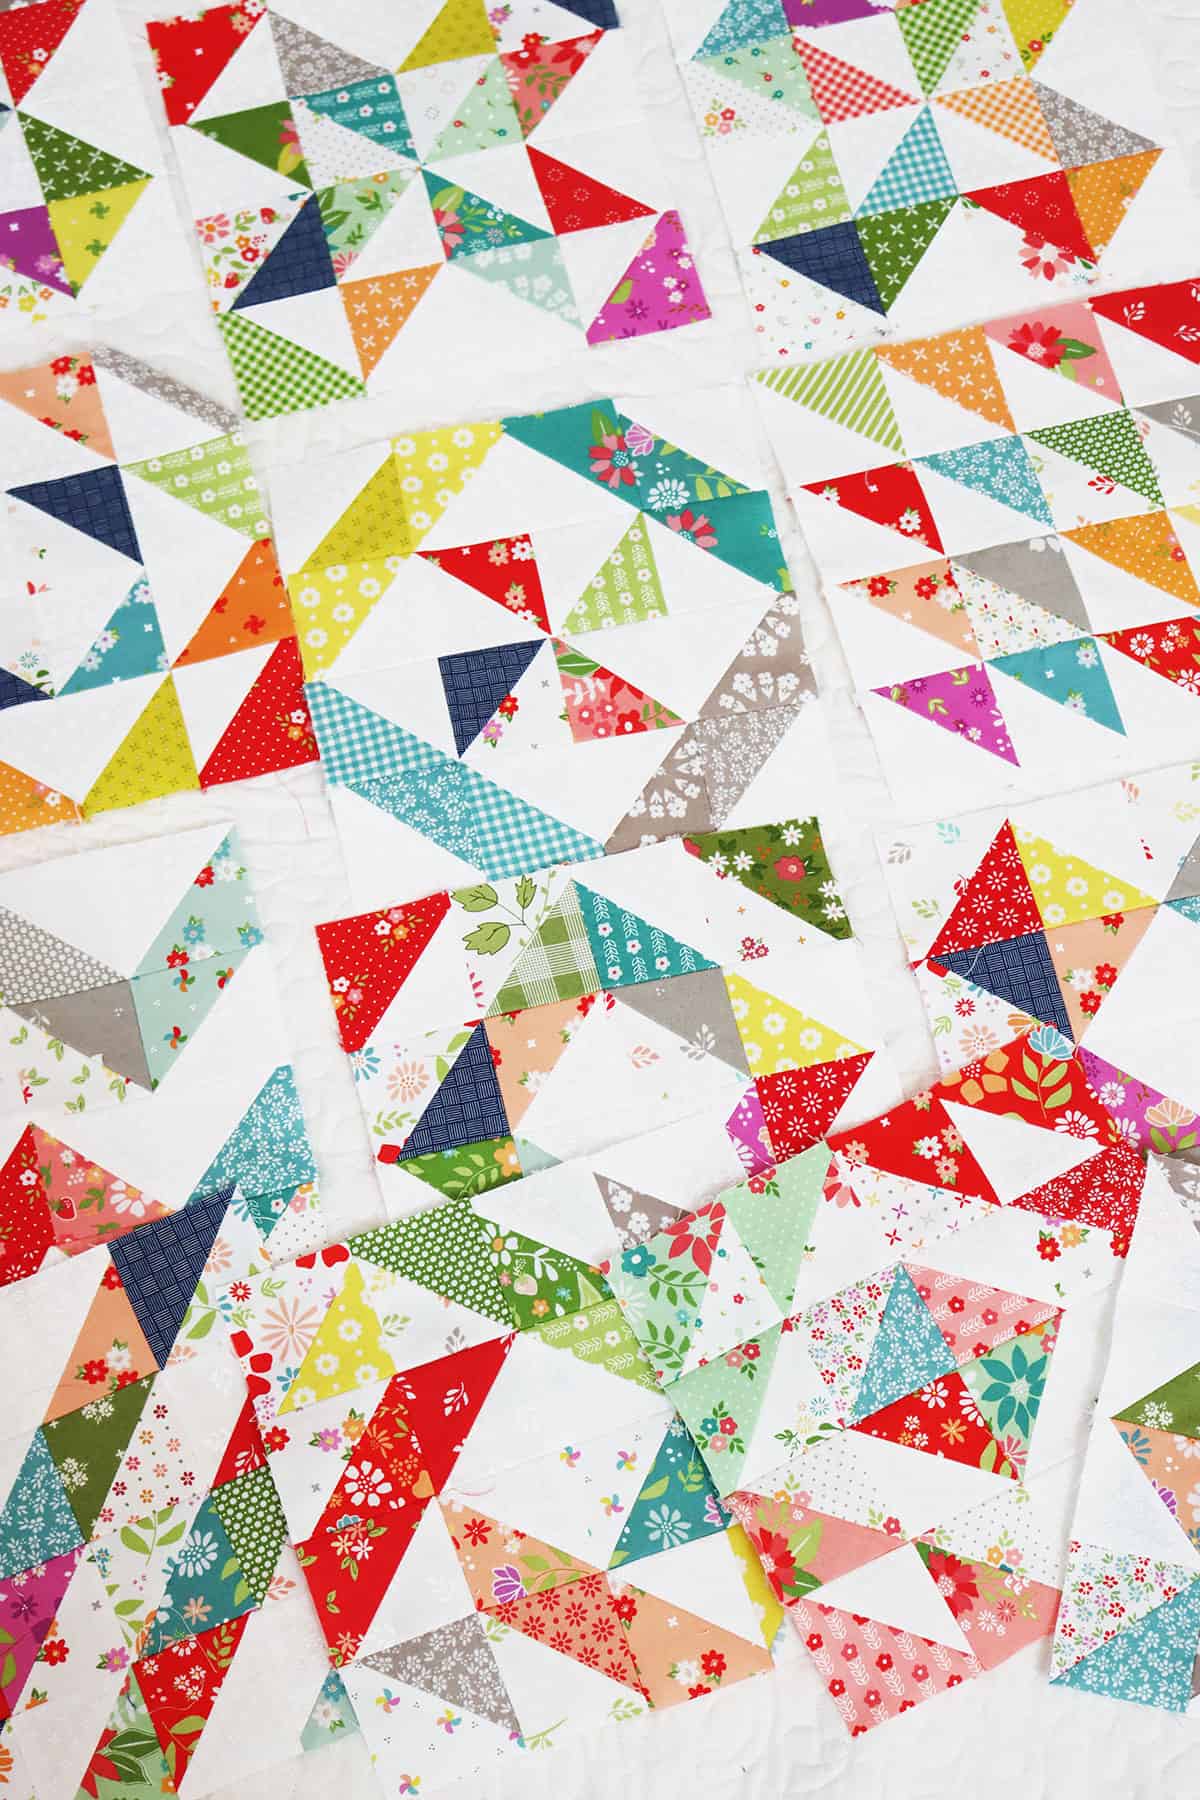 Scrappy Half Square Triangle Blocks by Sherri from A Quilting Life